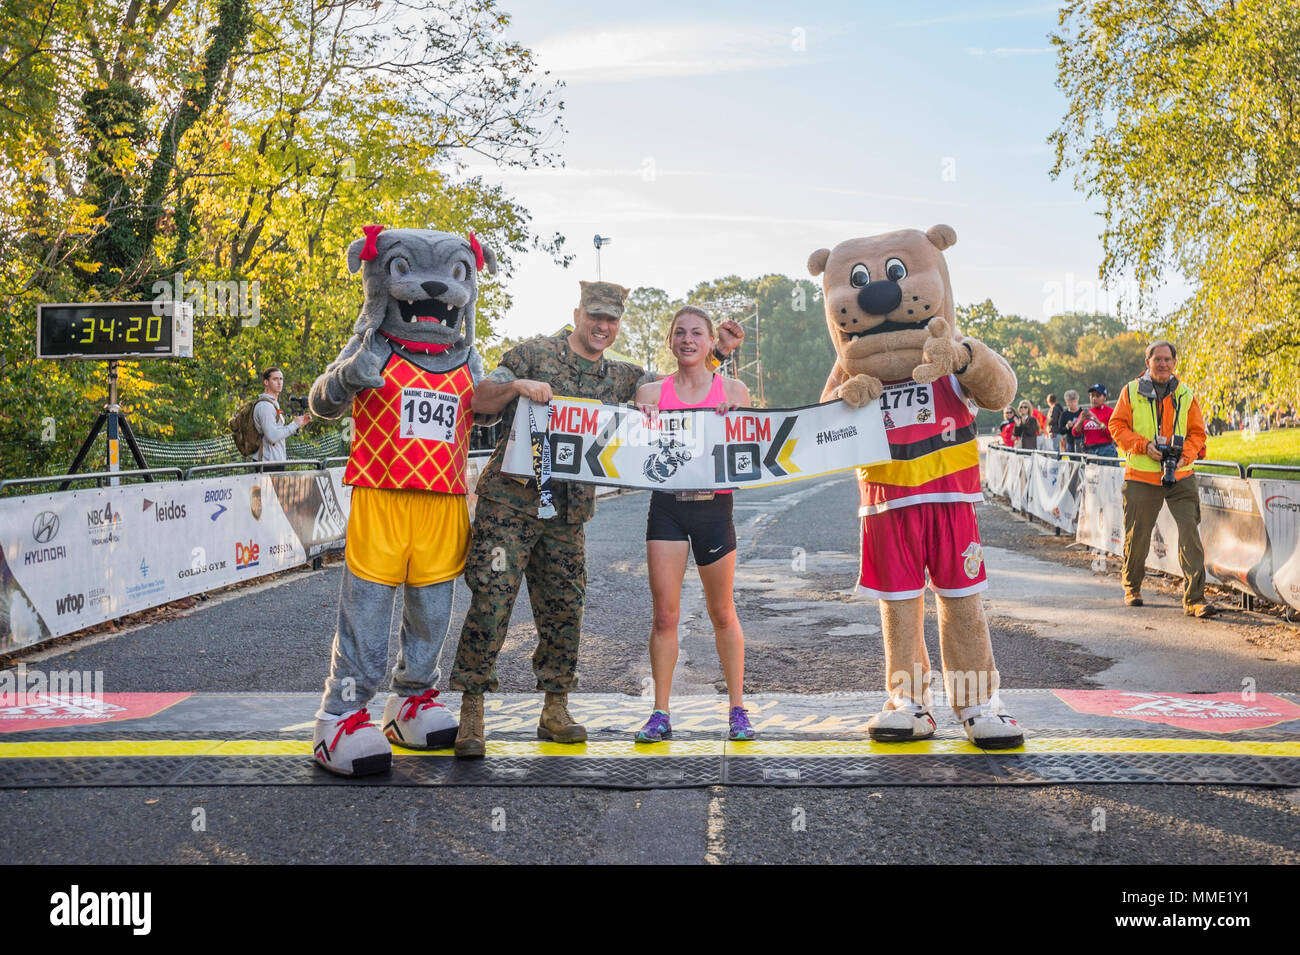 Sarah Bishop, Fairfax, Va., first female finisher of the Marine Corps Marathon (MCM) 10K, and U.S. Marine Corps Col. Joseph Murray, commanding officer of Marine Corps Base Quantico, pose for a photo with the MCM mascots, Arlington, Va., Oct. 22, 2017. Also known as 'The People's Marathon,' the 26.2 mile race drew roughly 30,000 participants to promote physical fitness, generate goodwill in the community, and showcase the organizational skills of the Marine Corps. (U.S. Marine Corps photo by Lance Cpl. Yasmin D. Perez) Stock Photo